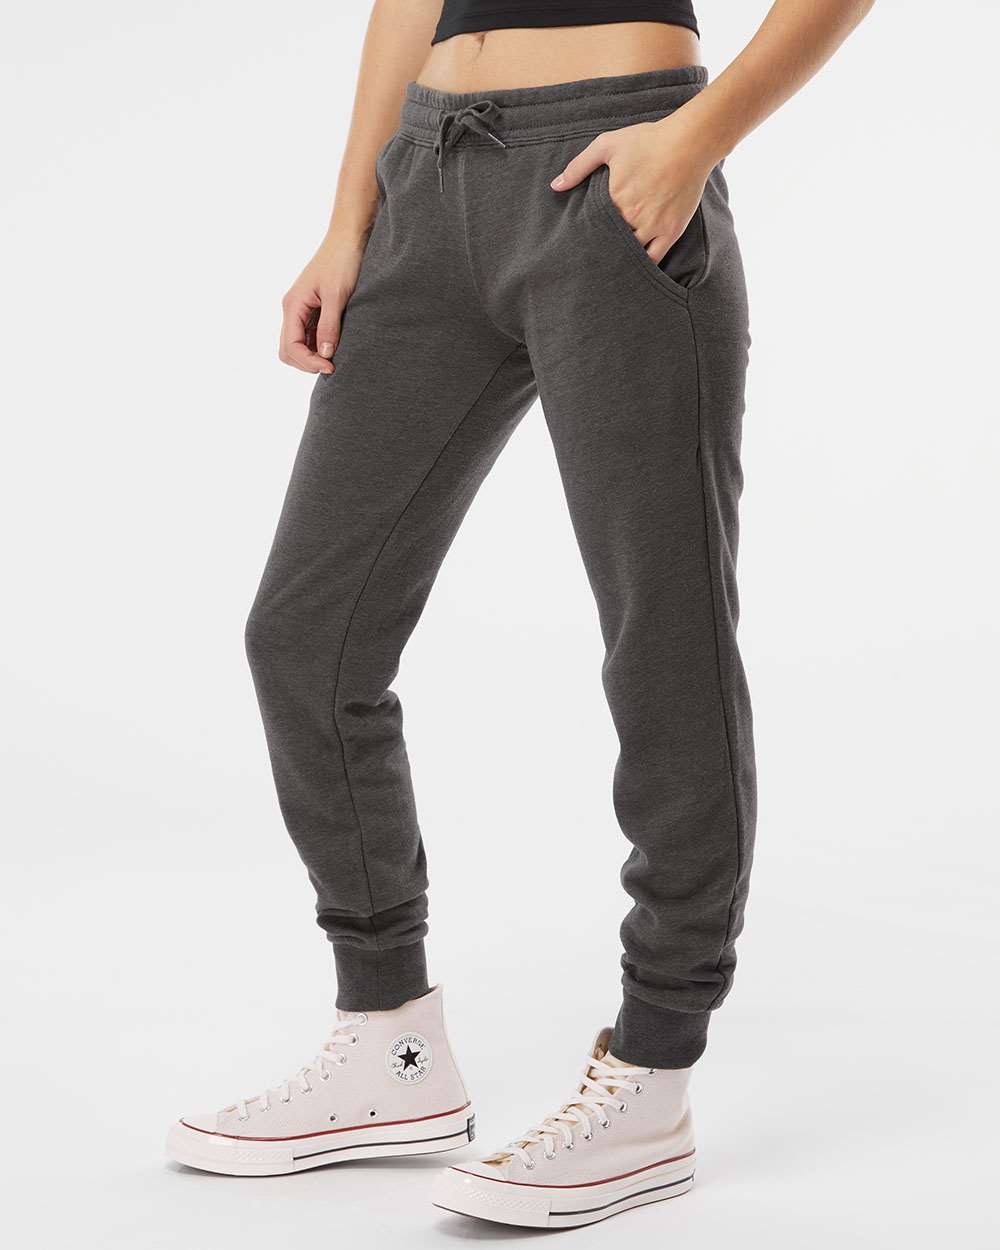 Affordable Wholesale Sweatpants With Back Pocket For Trendsetting Looks 